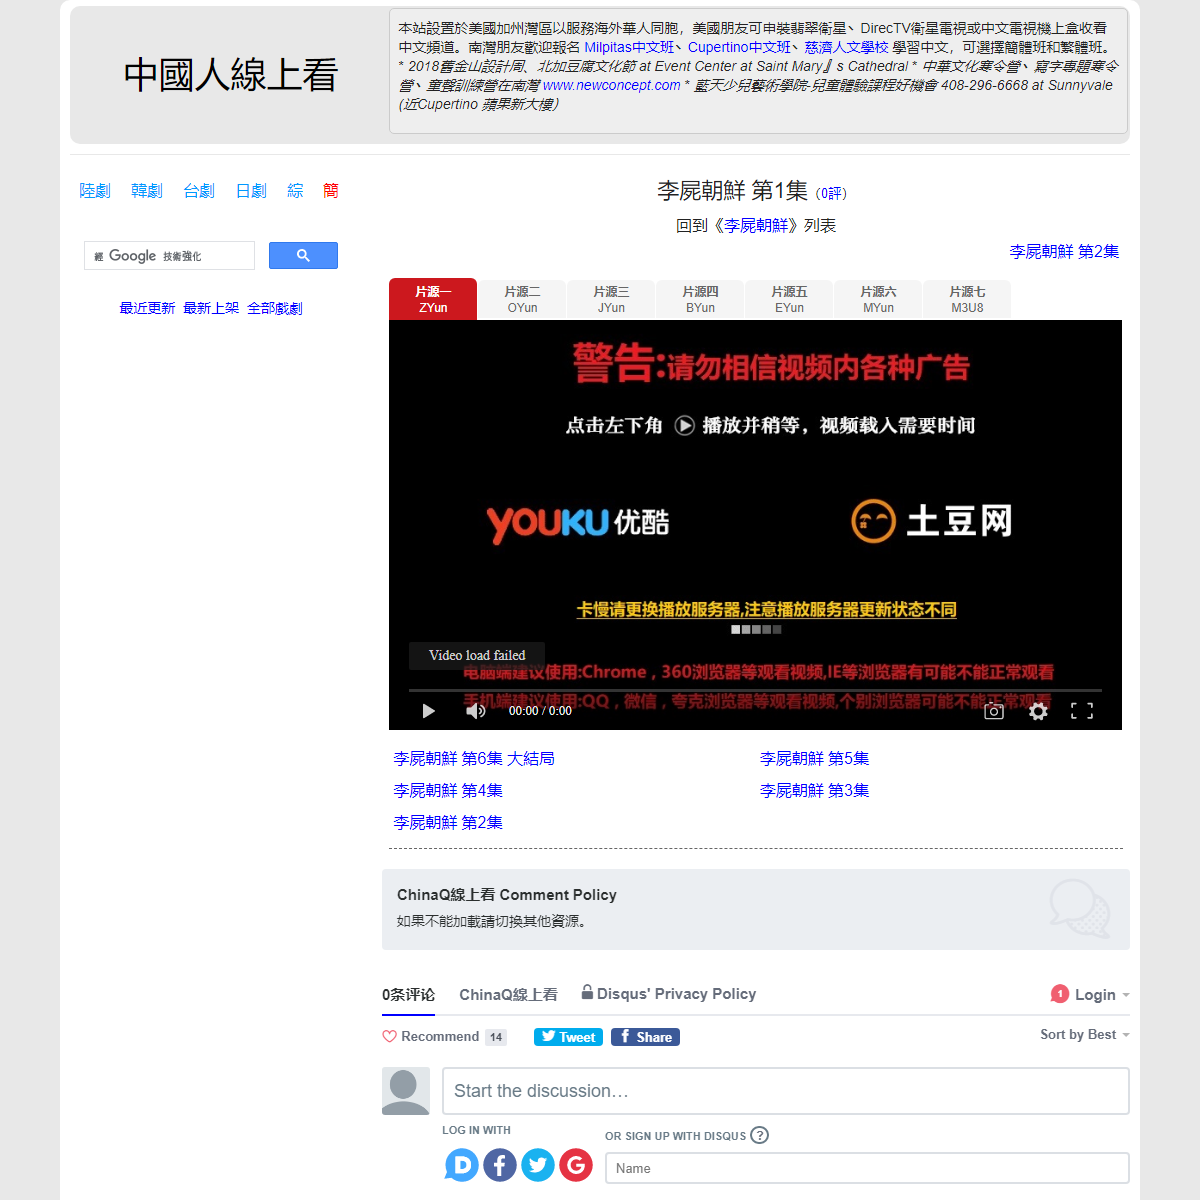 A complete backup of https://chinaq.tv/kr190125/1.html